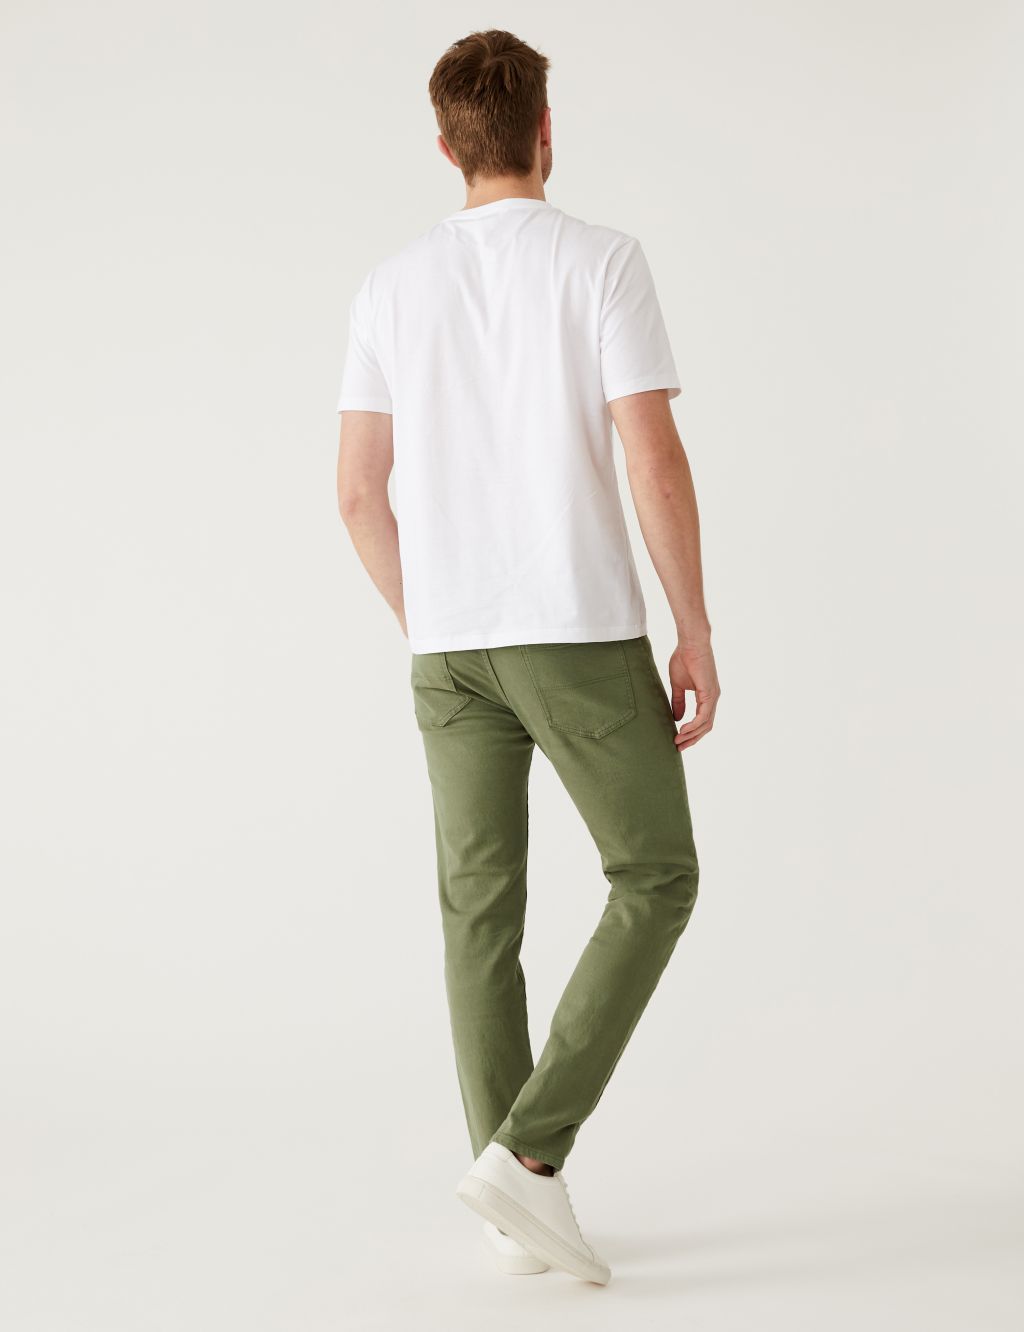 Slim Fit Tea Dyed Stretch Jeans image 4